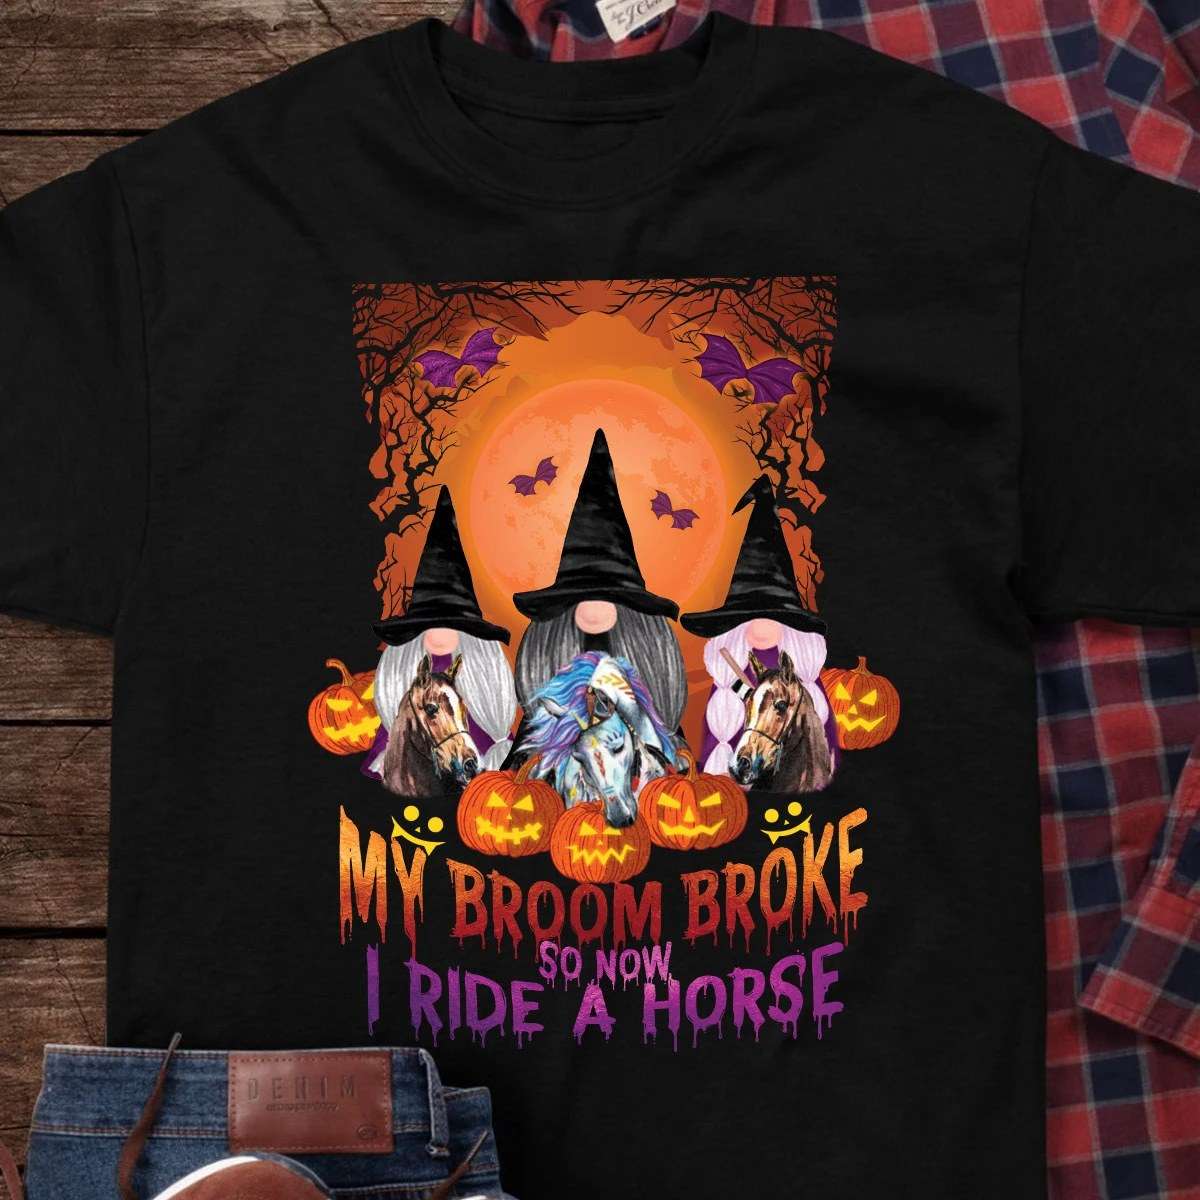 My broom boke so now I ride a horse - Horses and witches, Halloween witch costume